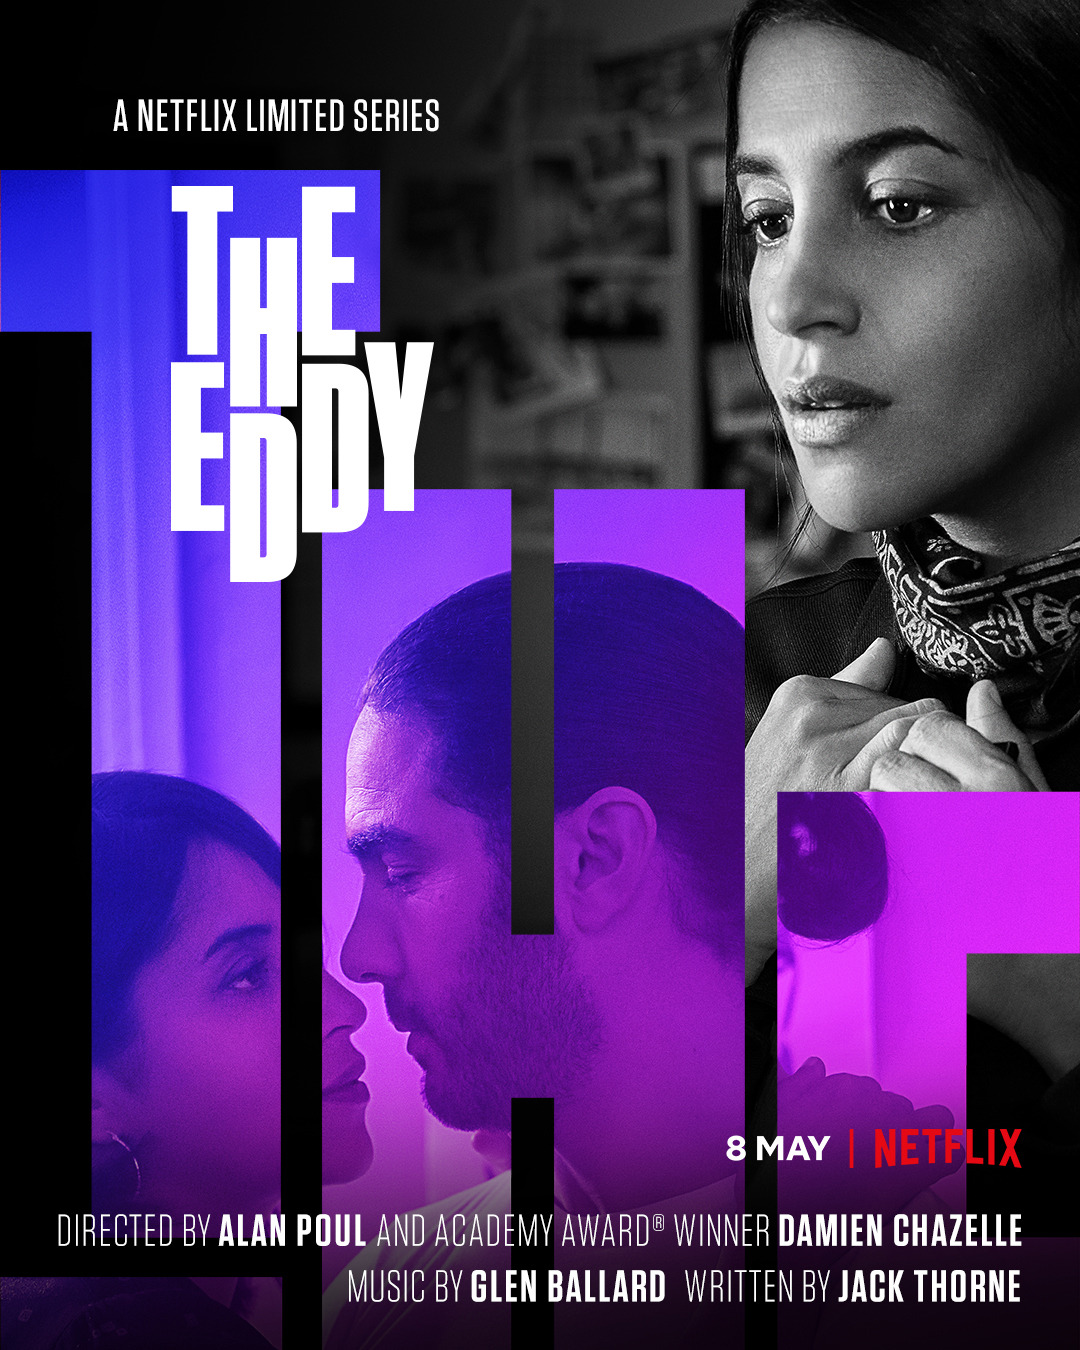 Extra Large TV Poster Image for The Eddy (#3 of 5)